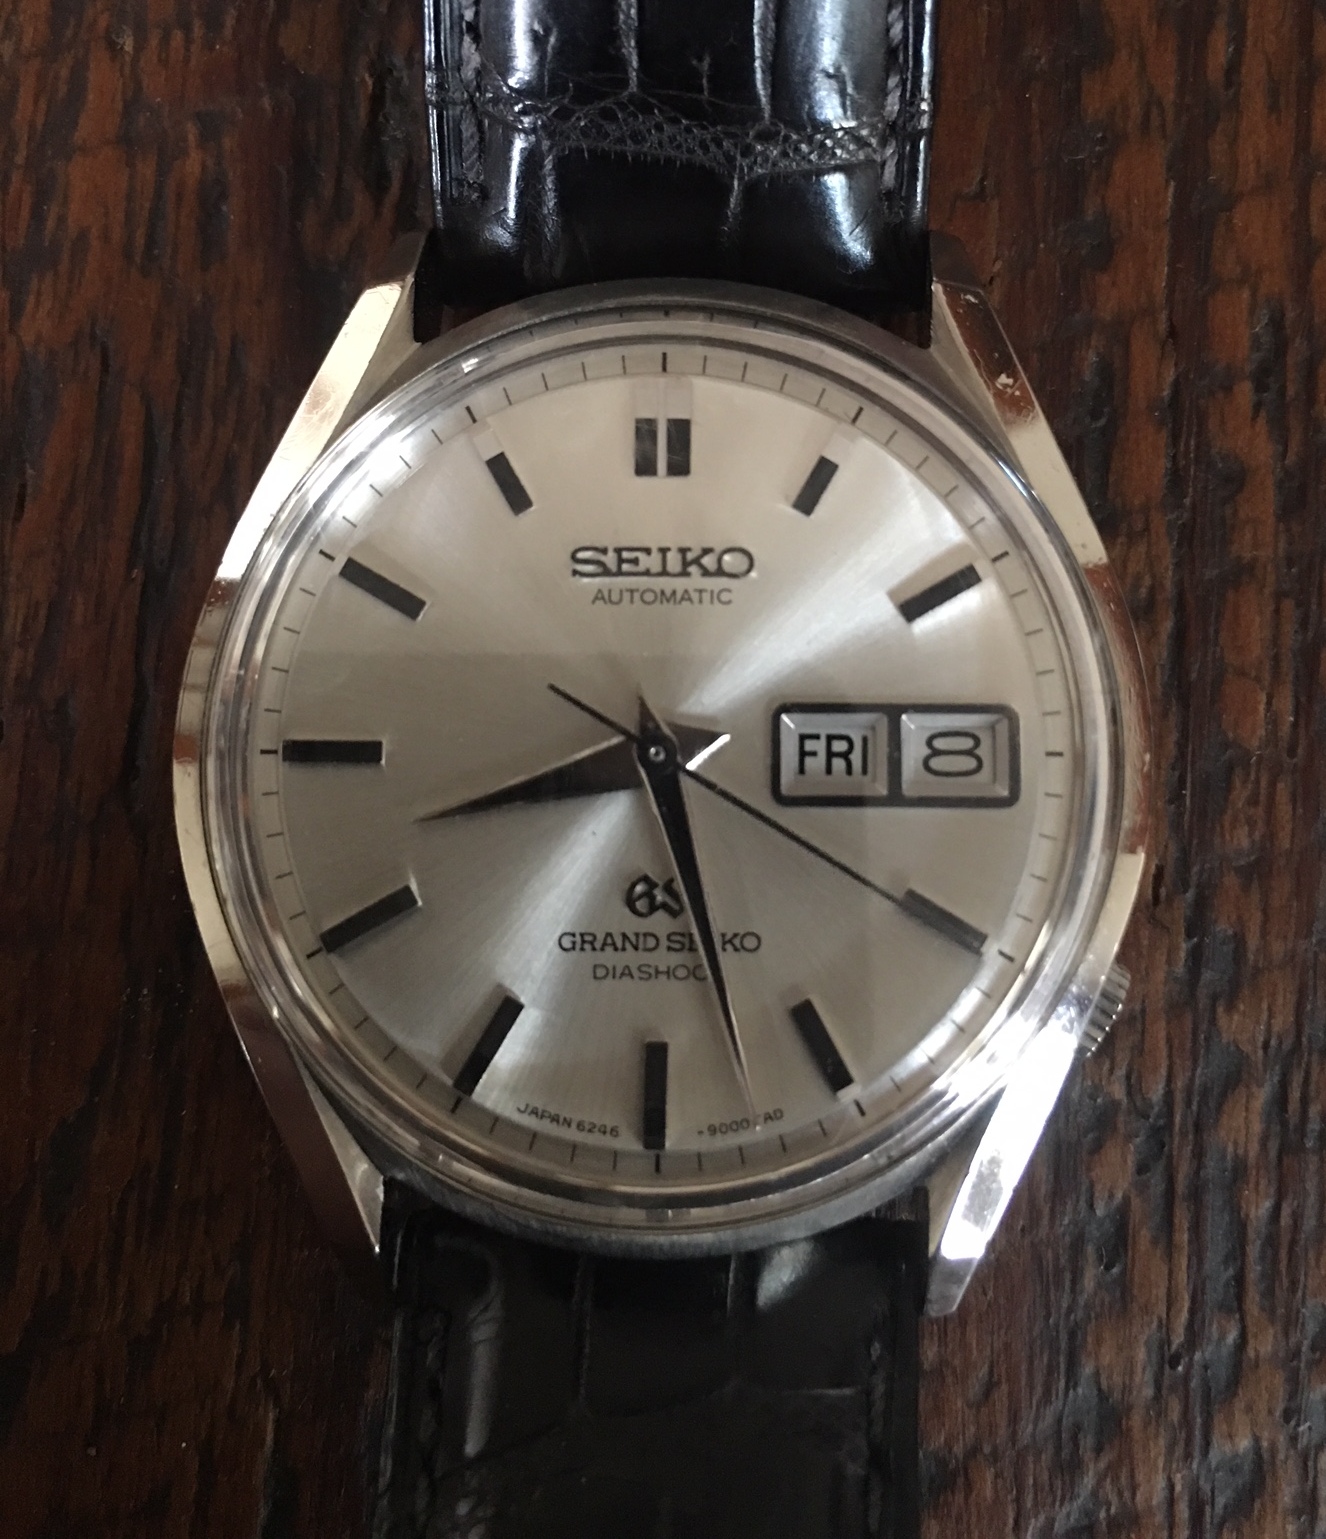 SOLD - 1967 Grand Seiko 6246-9001 Automatic Serviced | Omega Forums